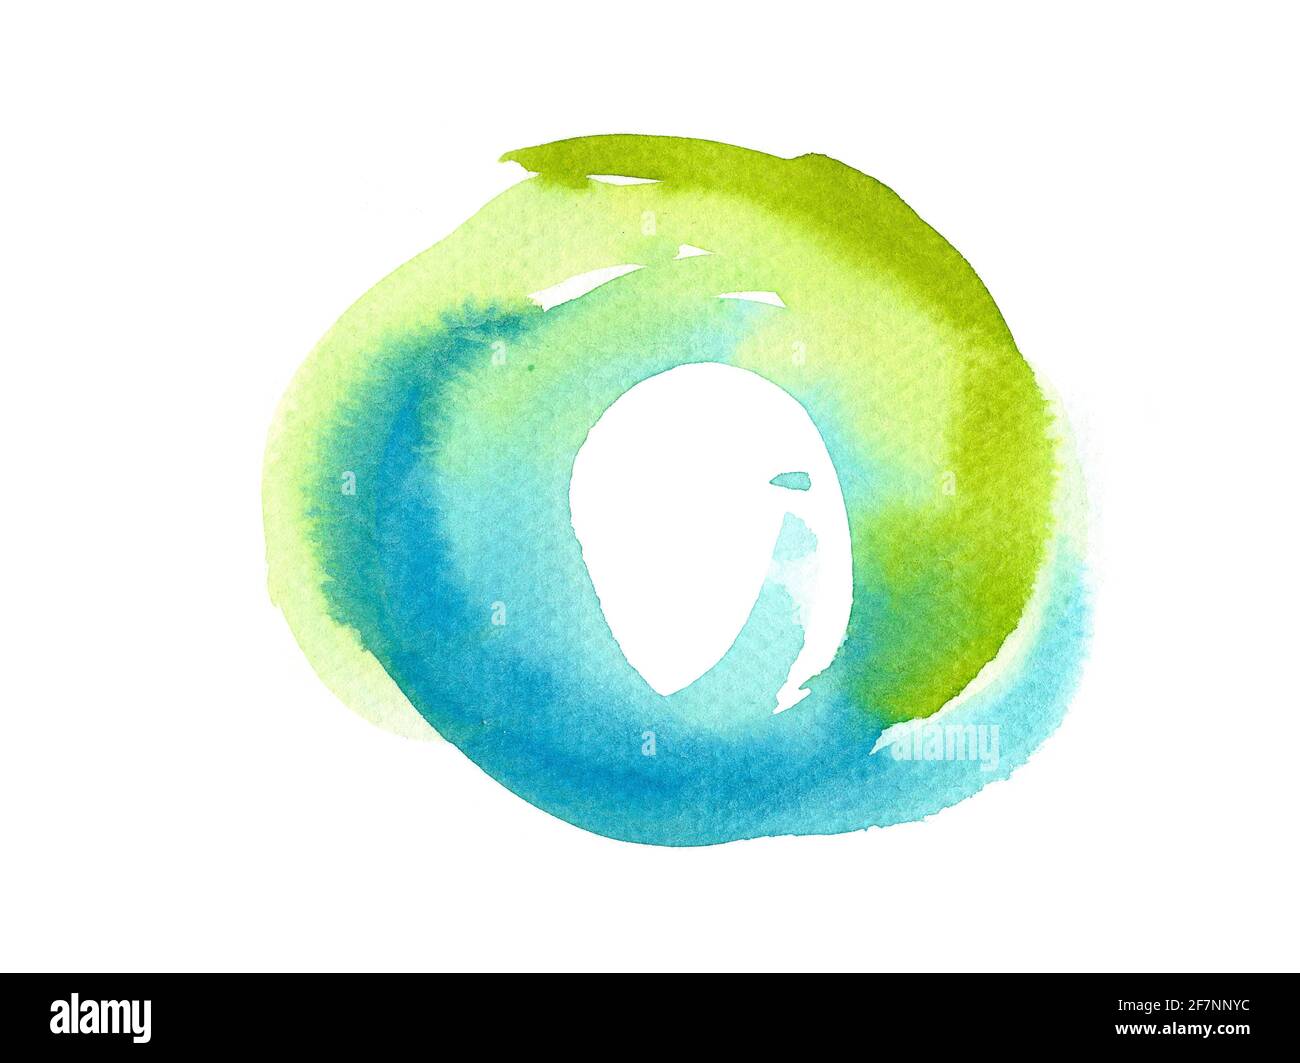 green-blue abstract circle background. Watercolor hand painting on white background. Grunge design element for poster, flyer, name card. Stock Photo